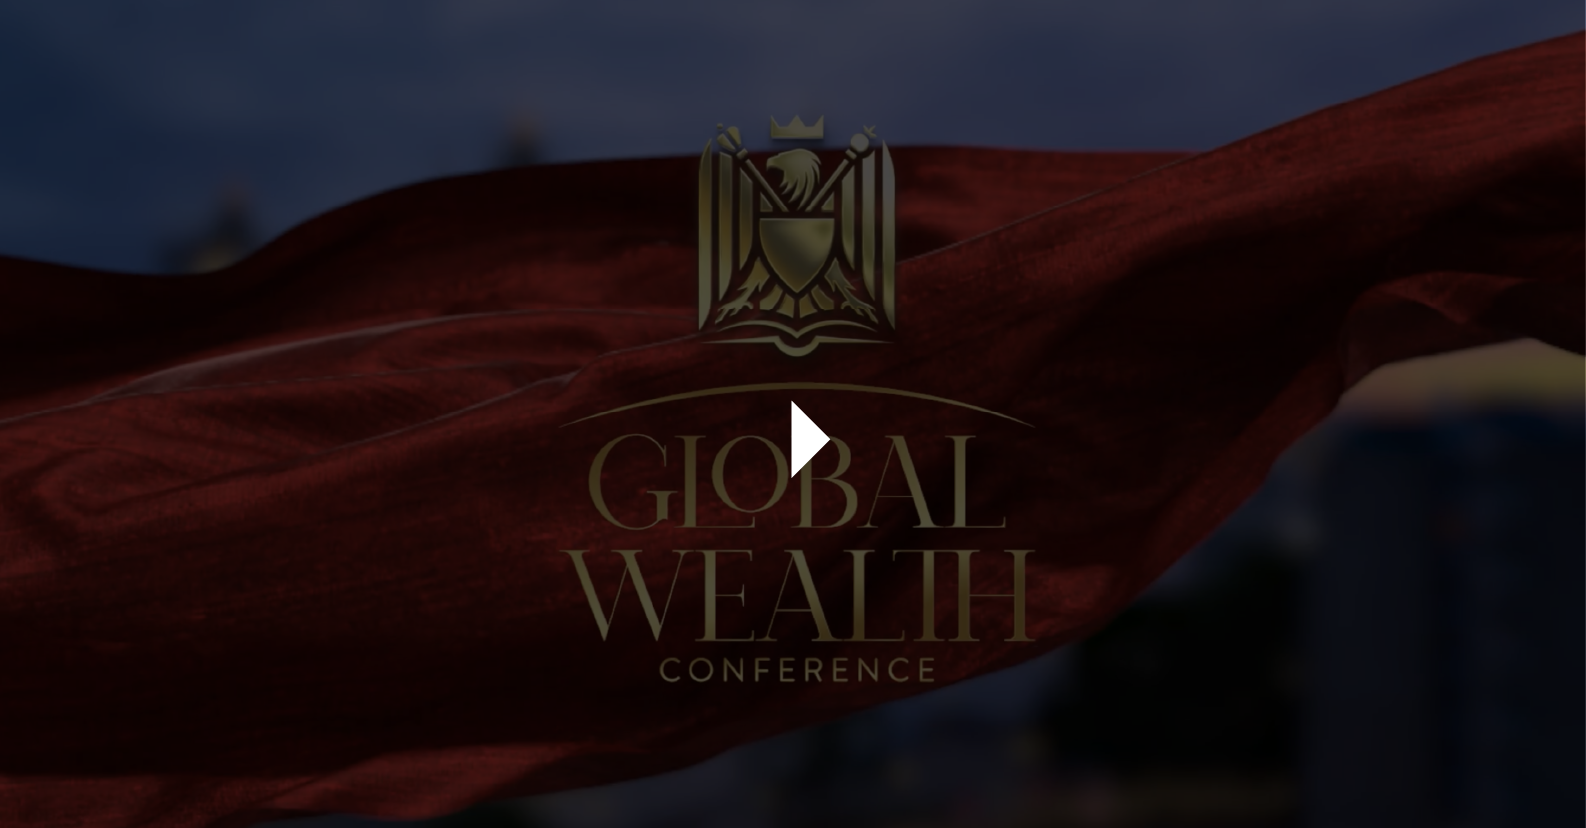 Global Wealth Conference Video Graphic